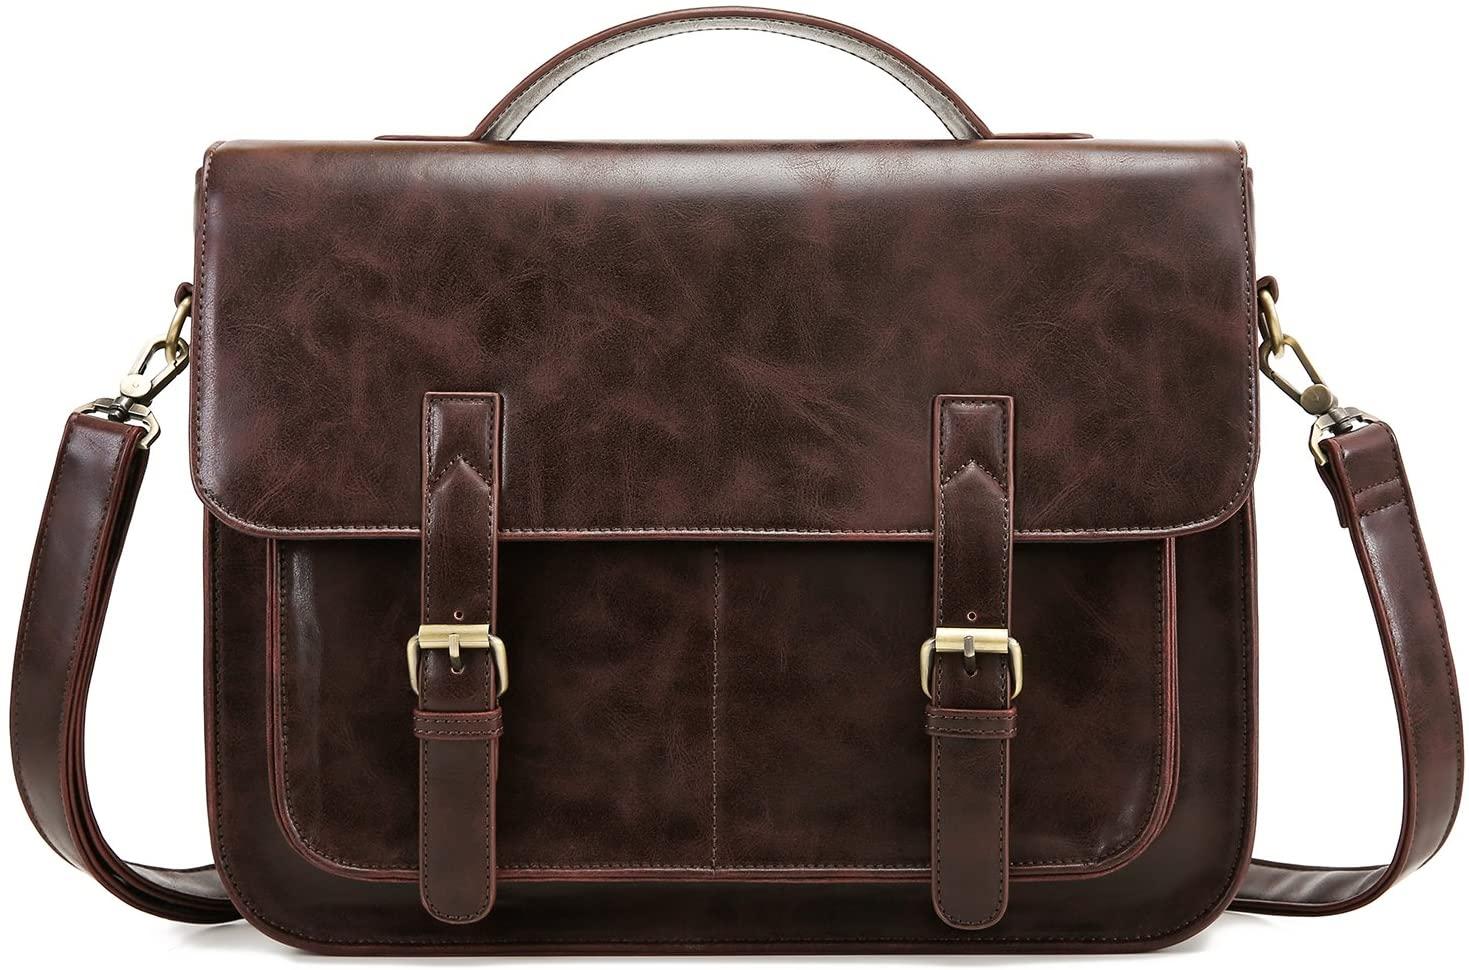 Ecosusi Messenger Bag PU Leather Laptop Briefcase for $10 Shipped